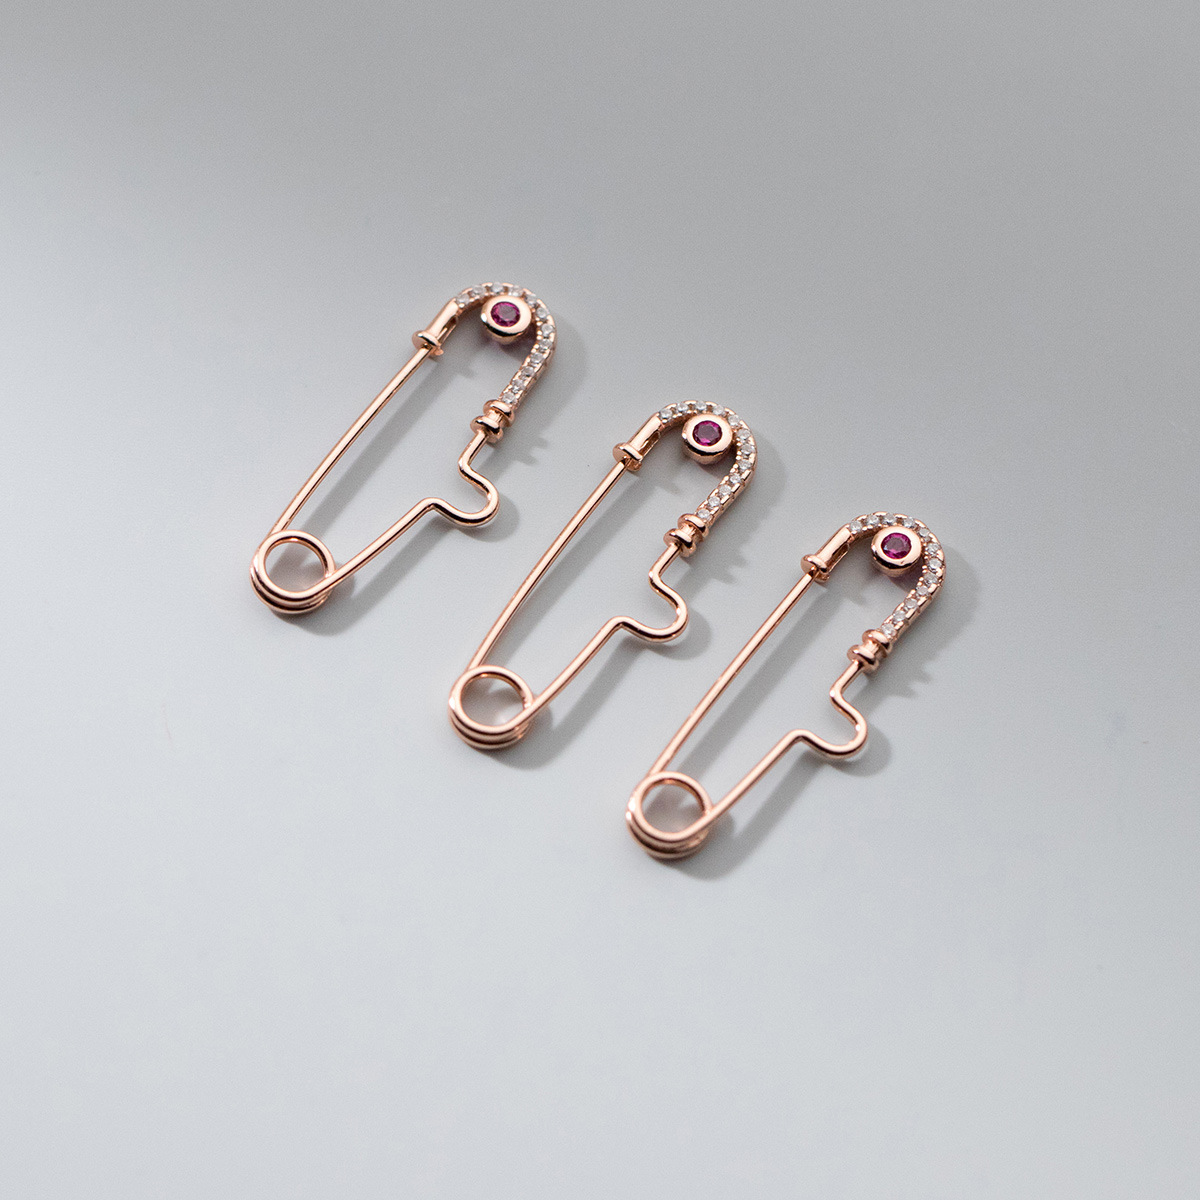 4:Electroplated rose gold